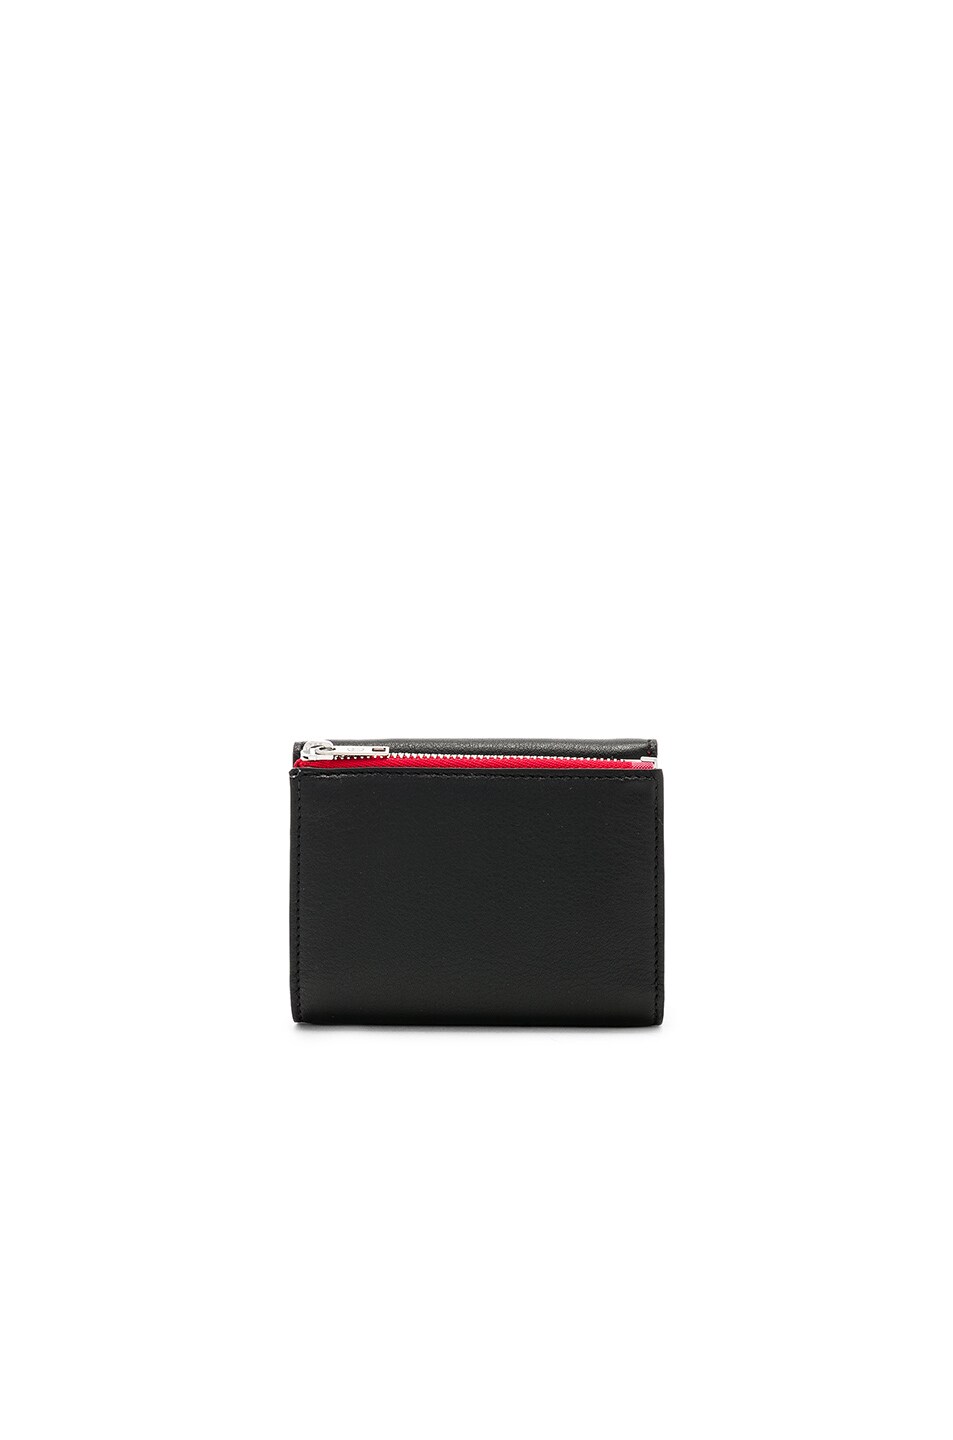 Image 1 of Maison Margiela Grained Leather Wallet in Black & Red